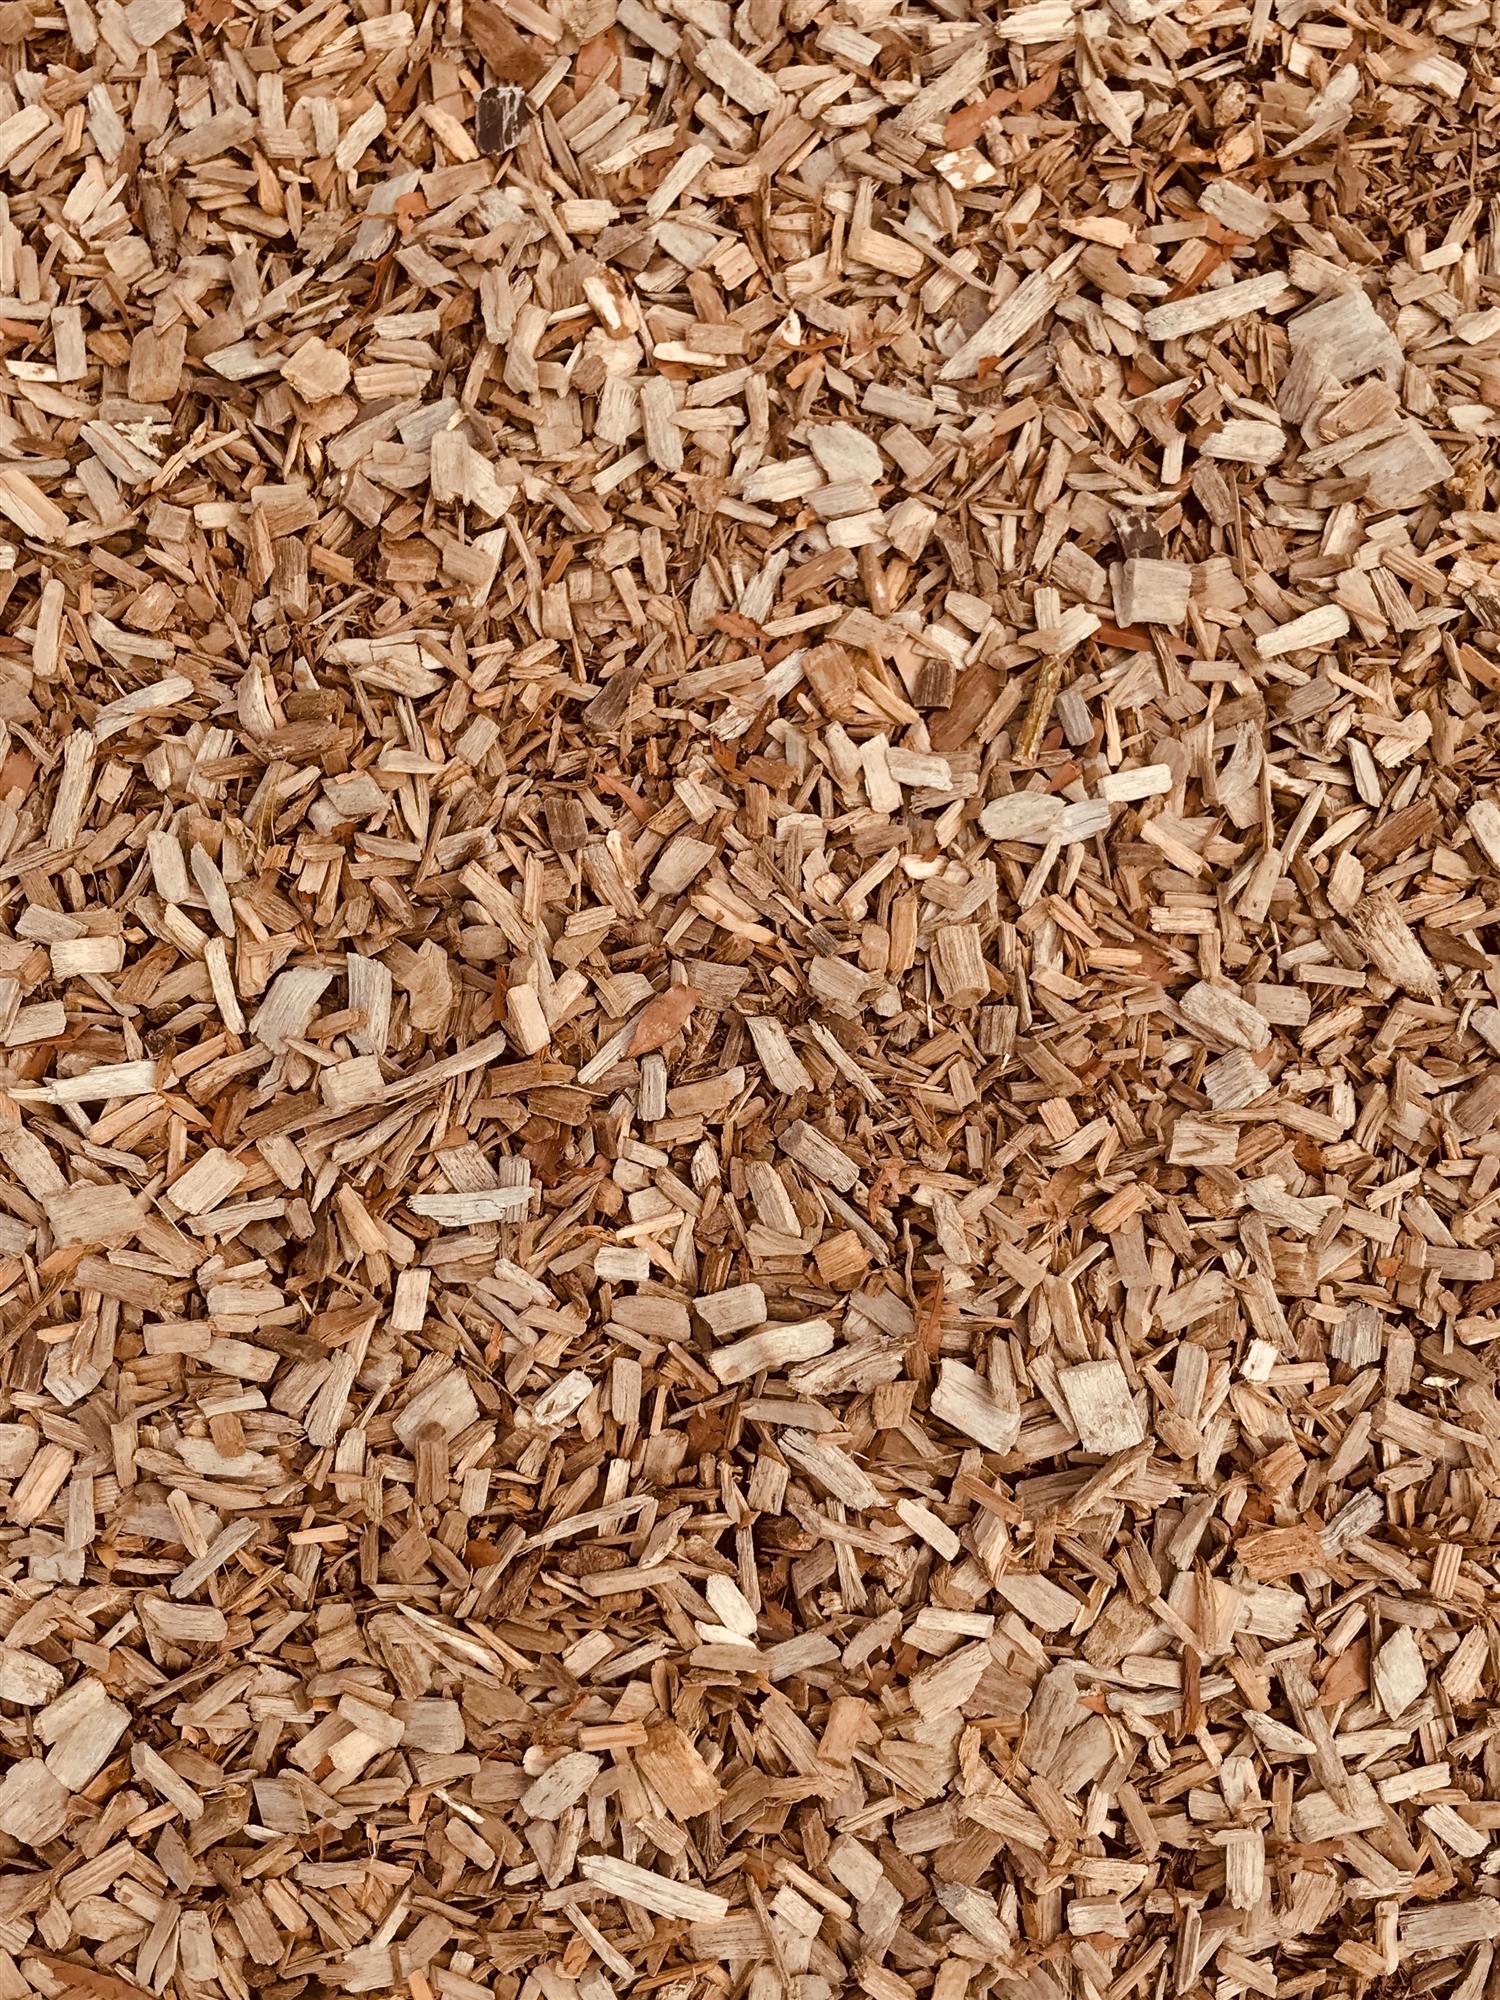 Mulch installation service for residential homes in Washington, WI